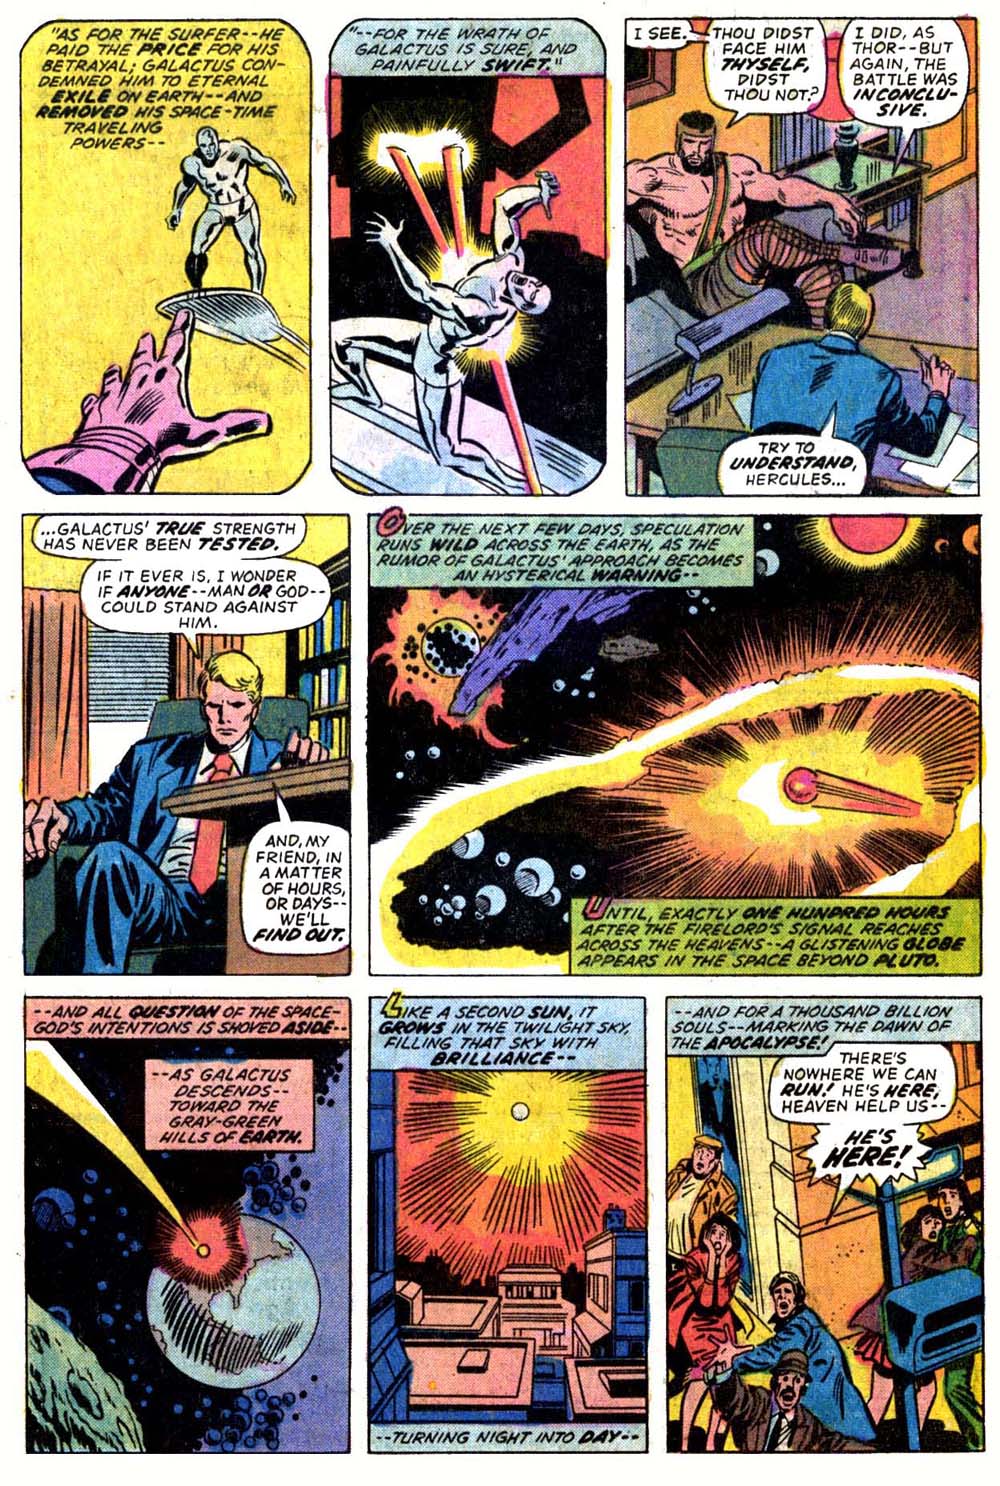 Galactus removed the Silver Surfer's space time powers